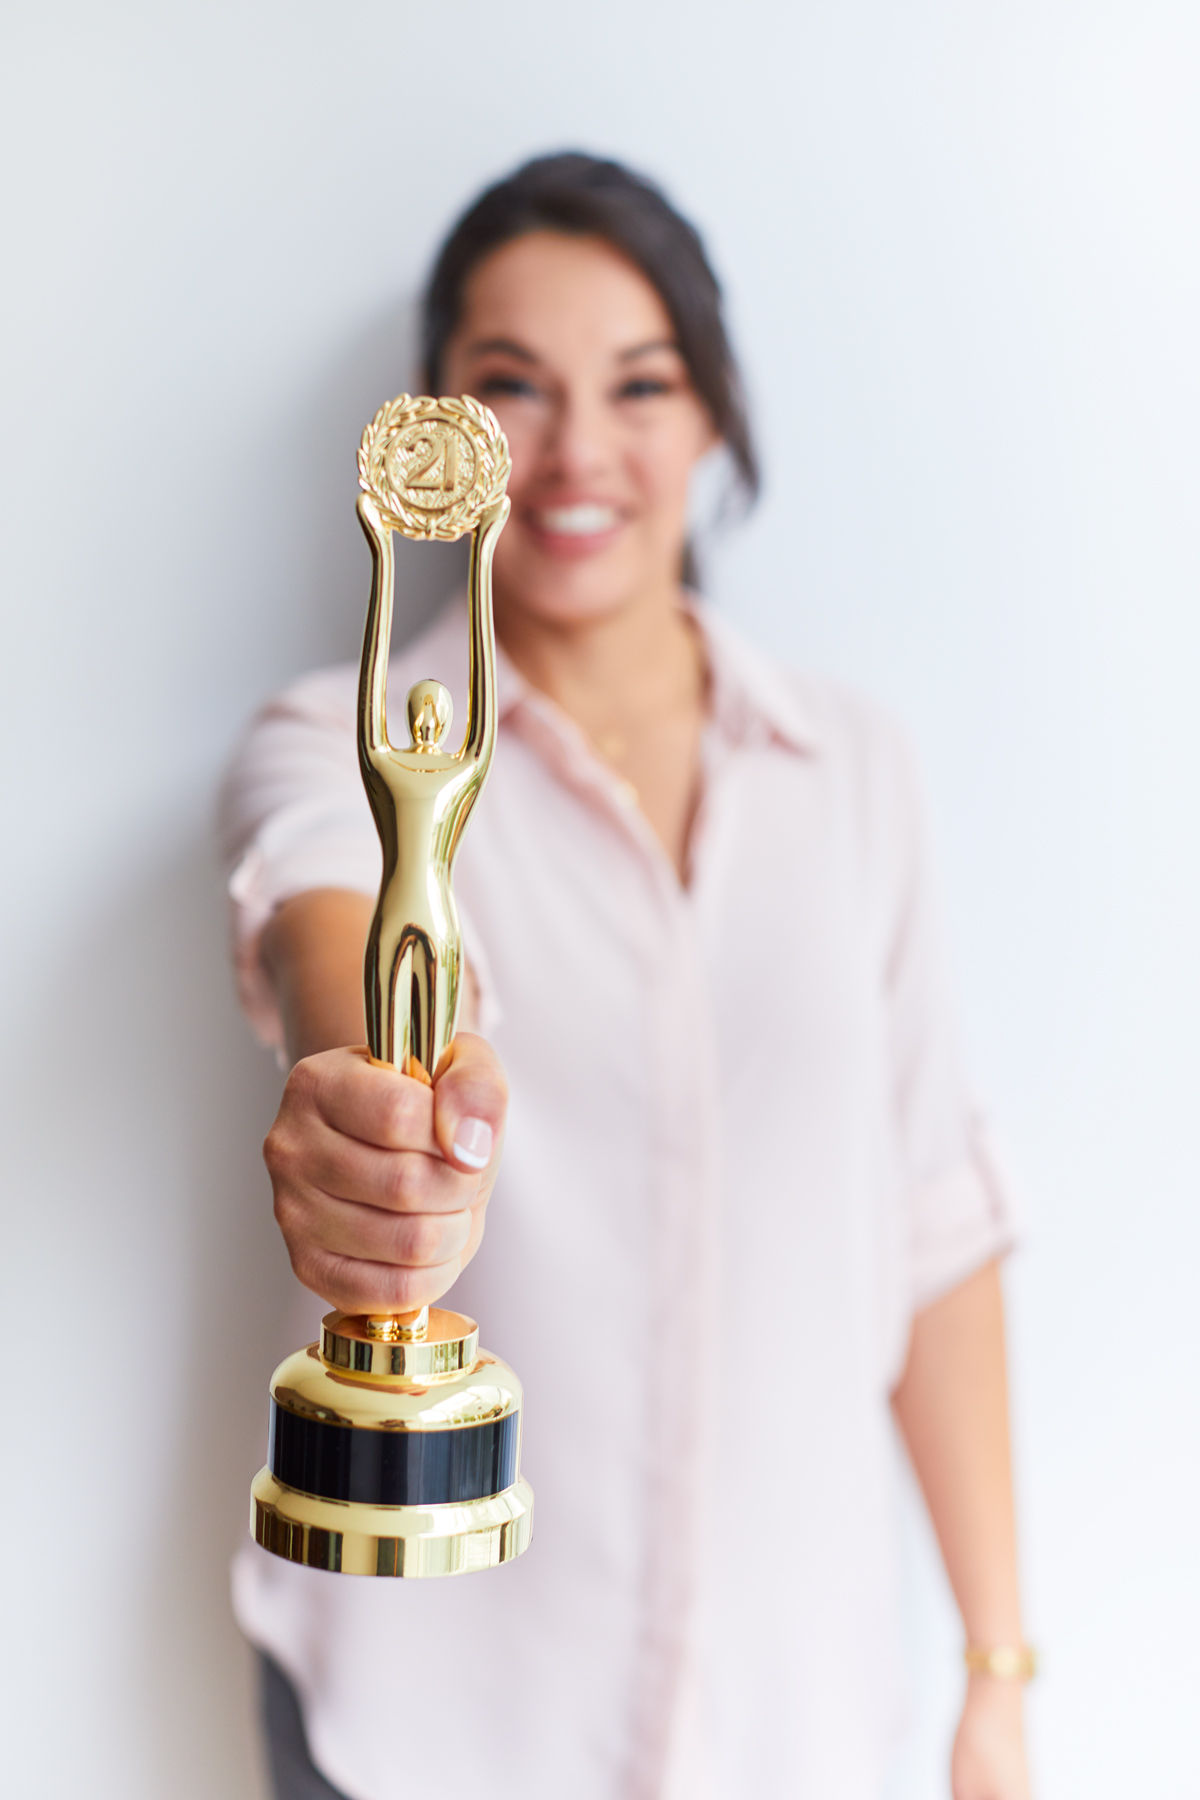 Award Winning Real Estate Agent with Century 21